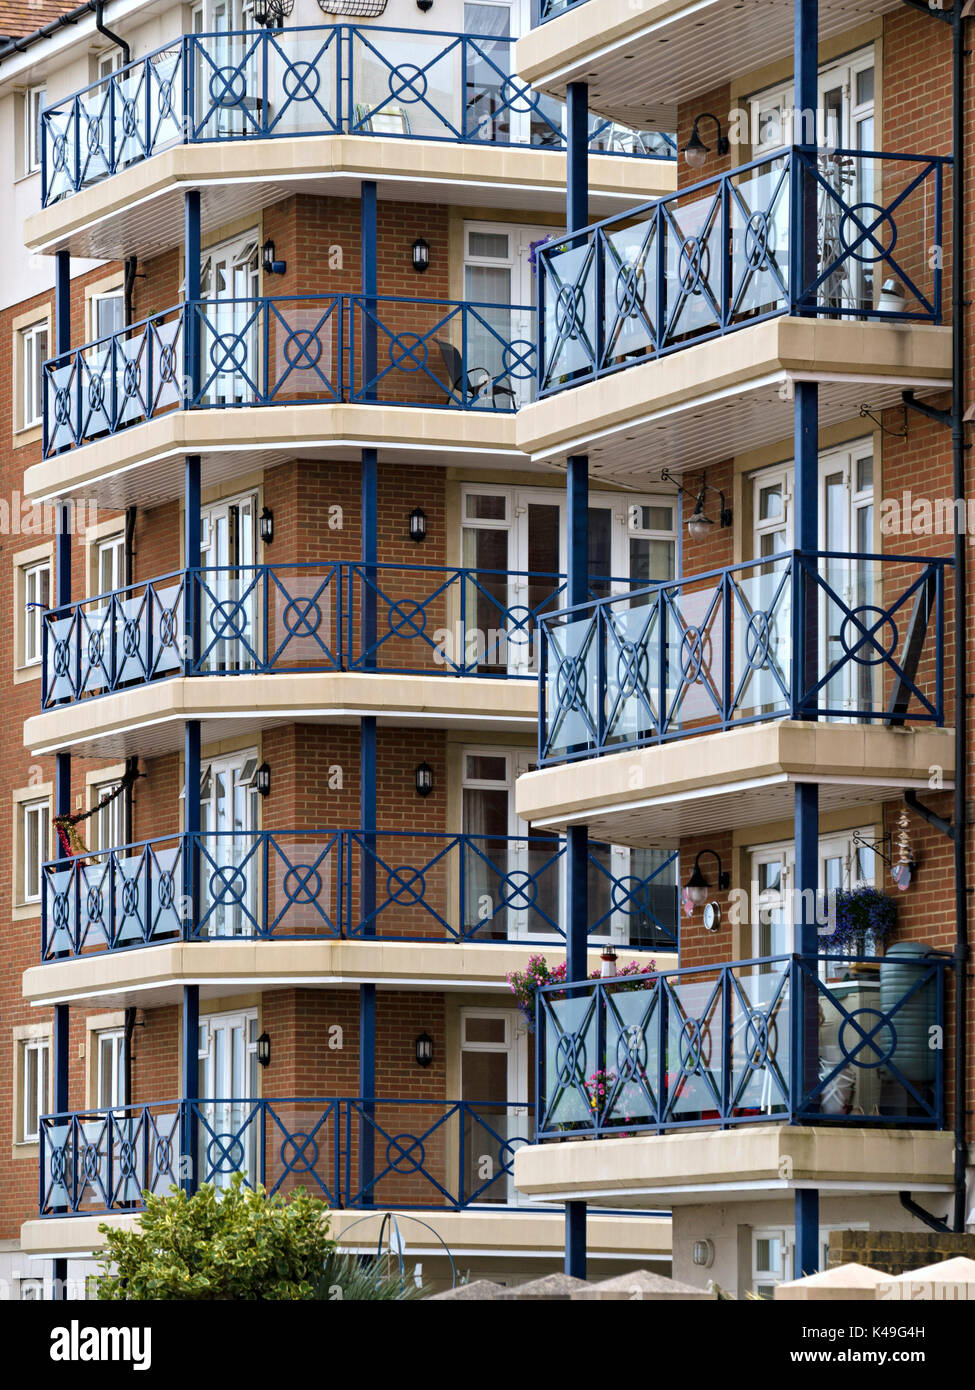 Modern flats and apartments with blue painted metal railings and balconies, Sovereign Harbour, Eastbourne, East Sussex, England, UK. Stock Photo